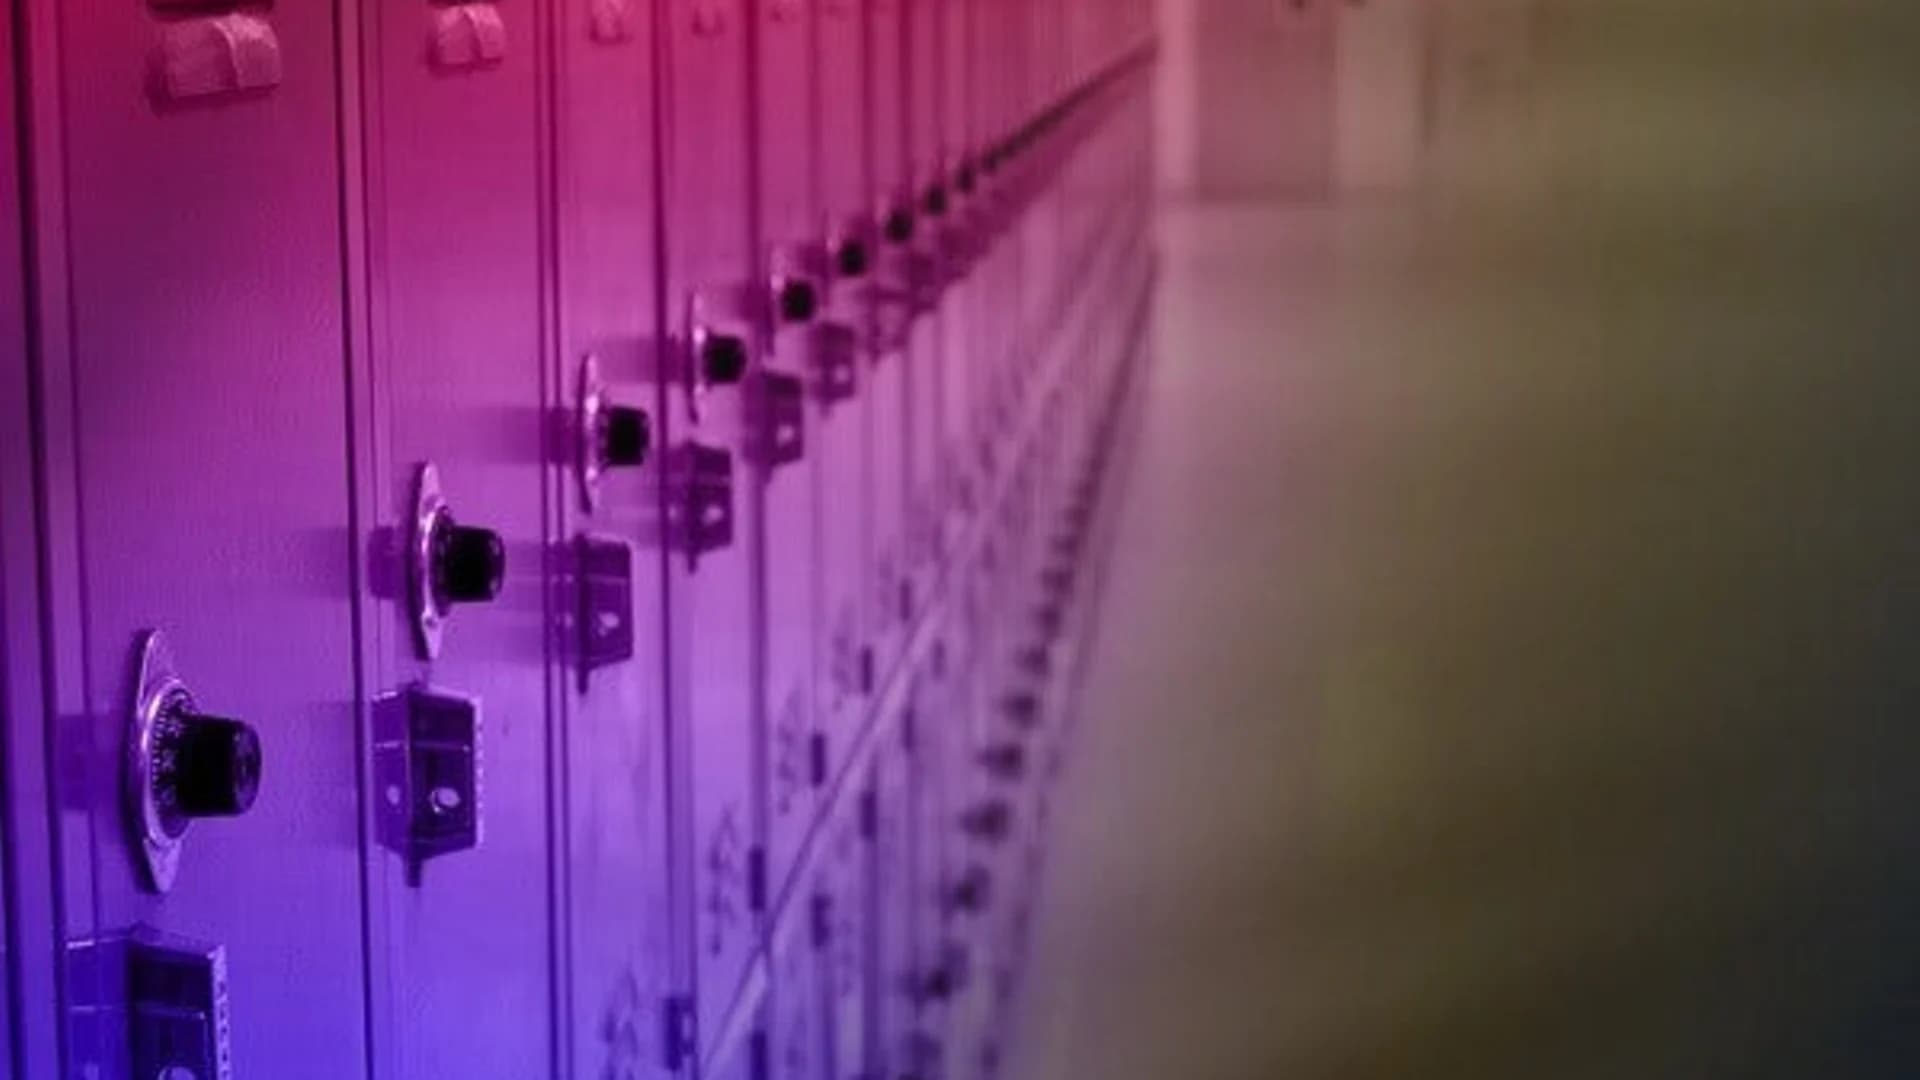 4 students accused of hacking district system, changing grades